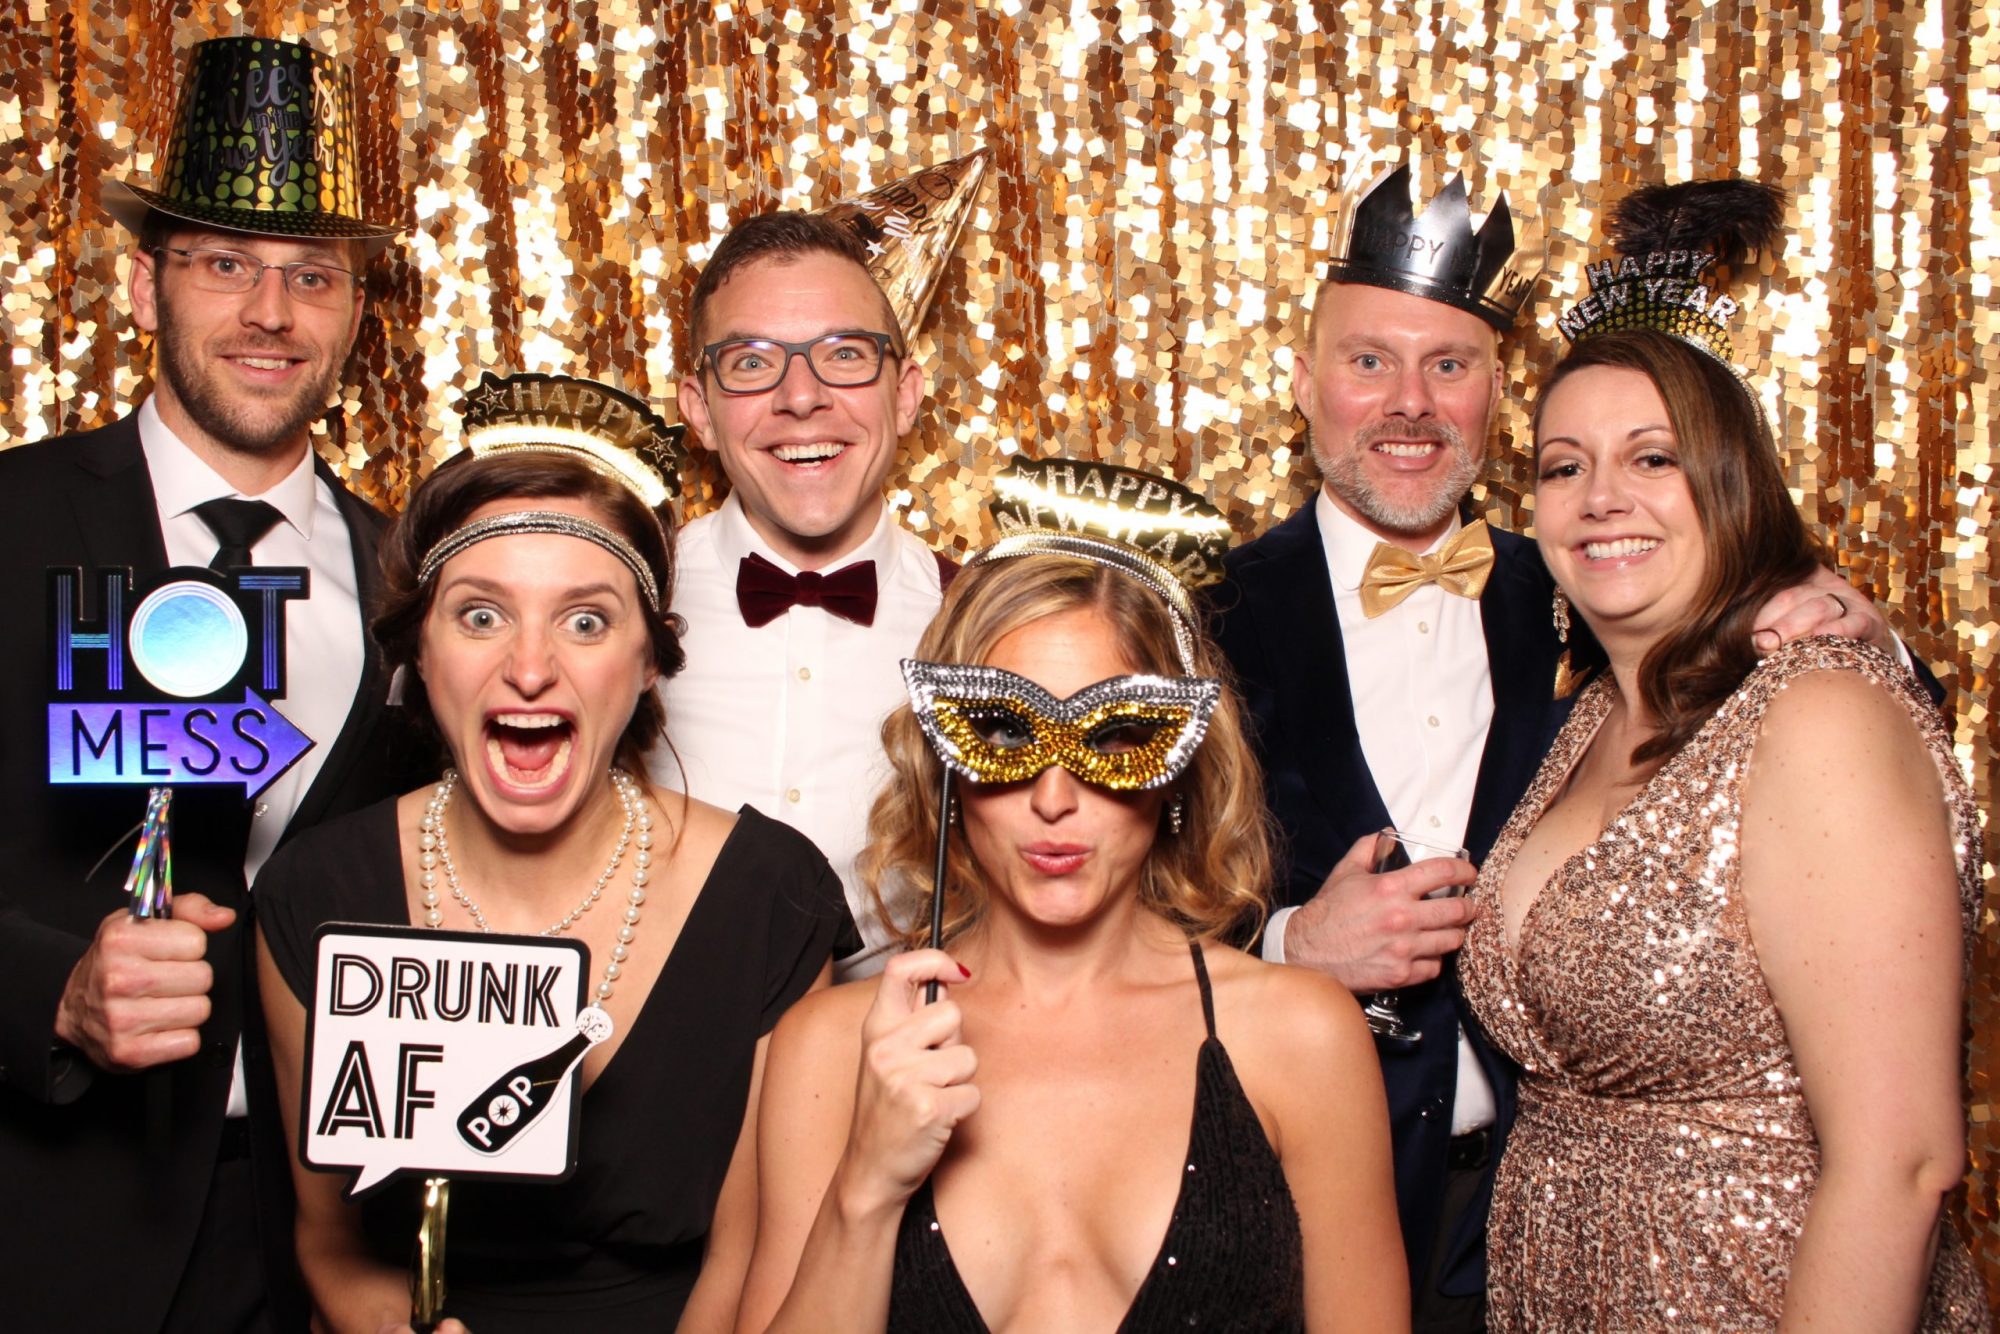 The Roaring 20s Towne Lake New Year's Eve Party